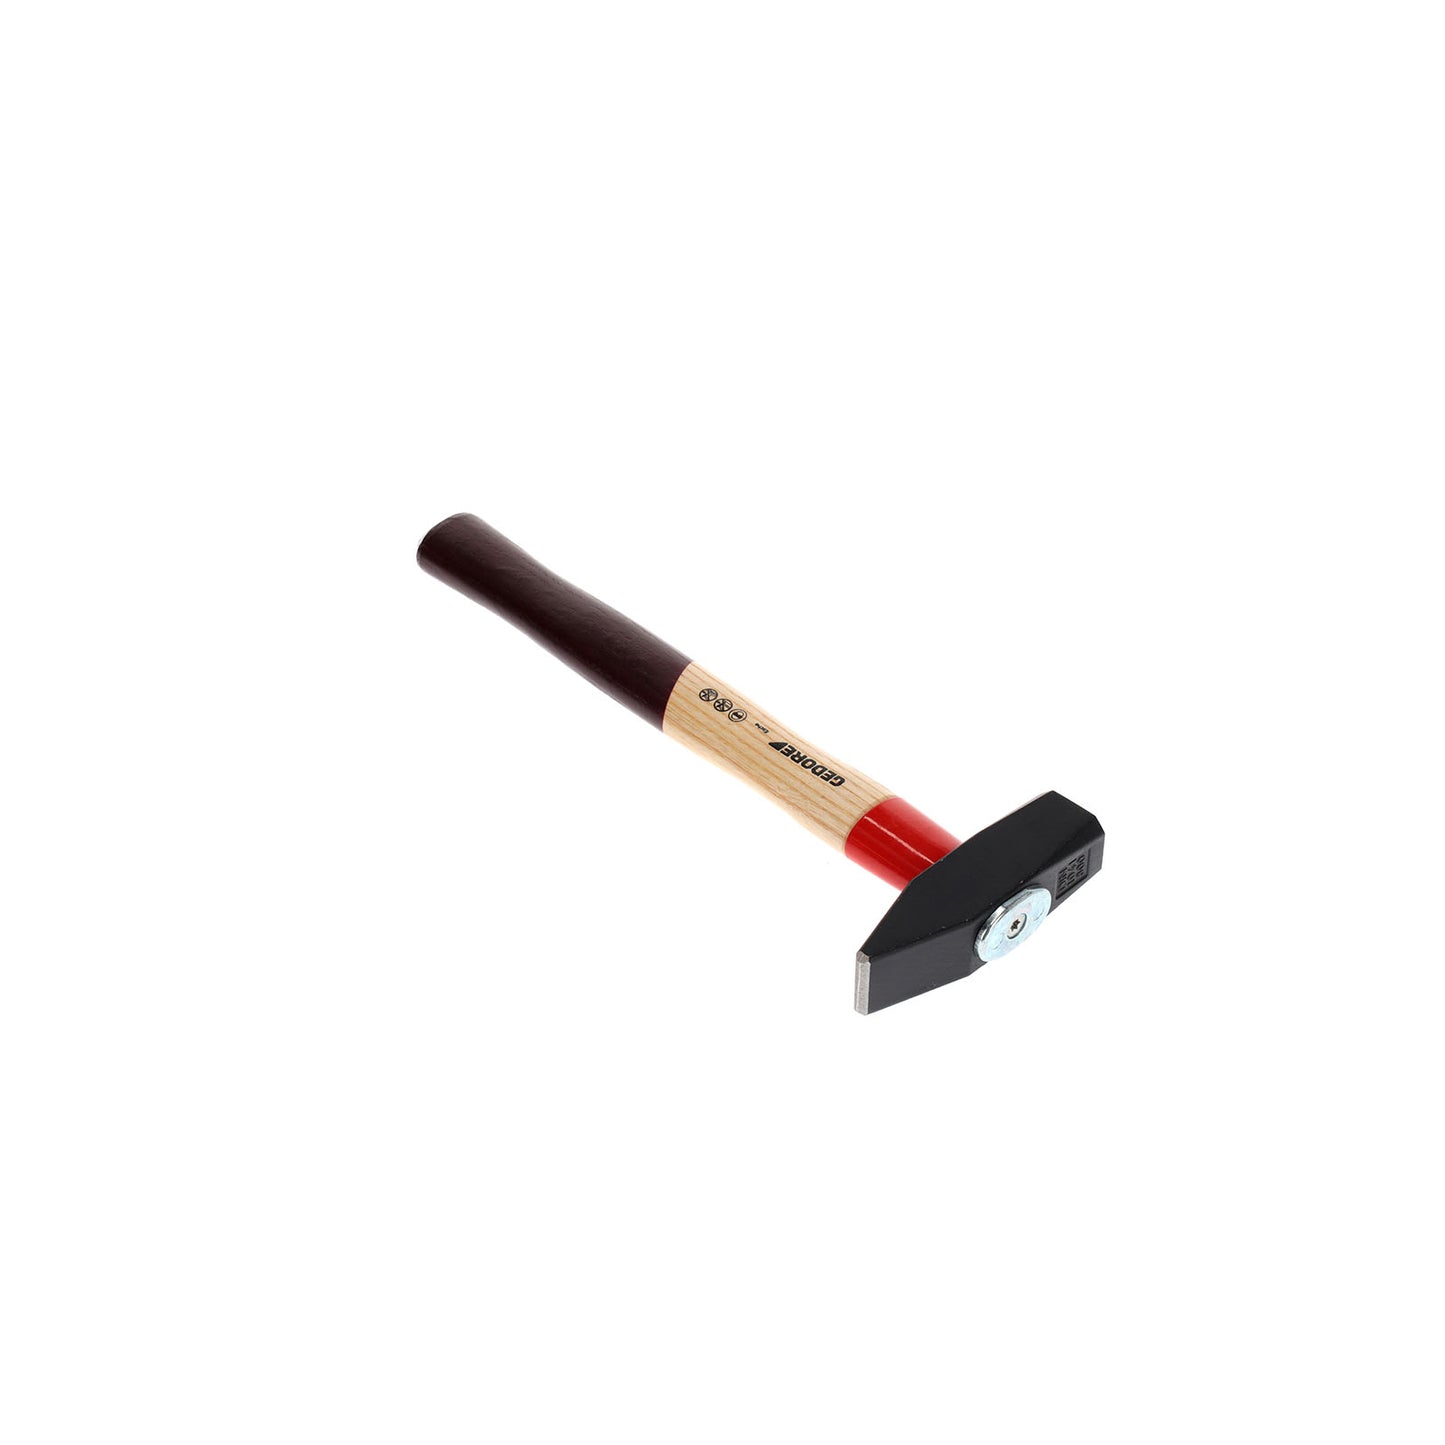 GEDORE 600 E-800 - ROTBAND assembly hammer 800g (8582420)